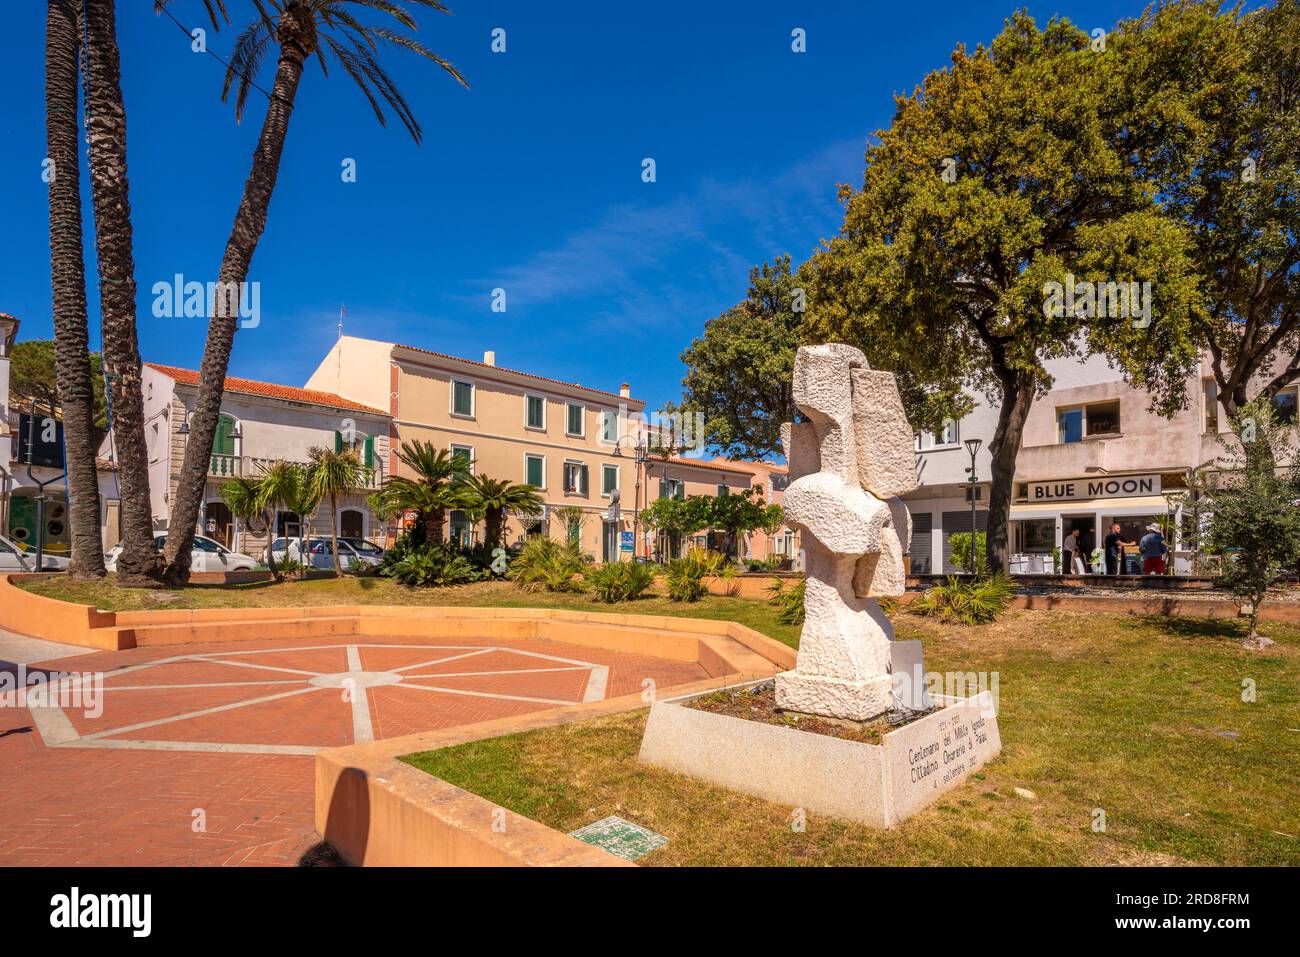 View of palm trees and cafes in Piazza due Palme, Palau, Sardinia, Italy, Mediterranean, Europe Stock Photo